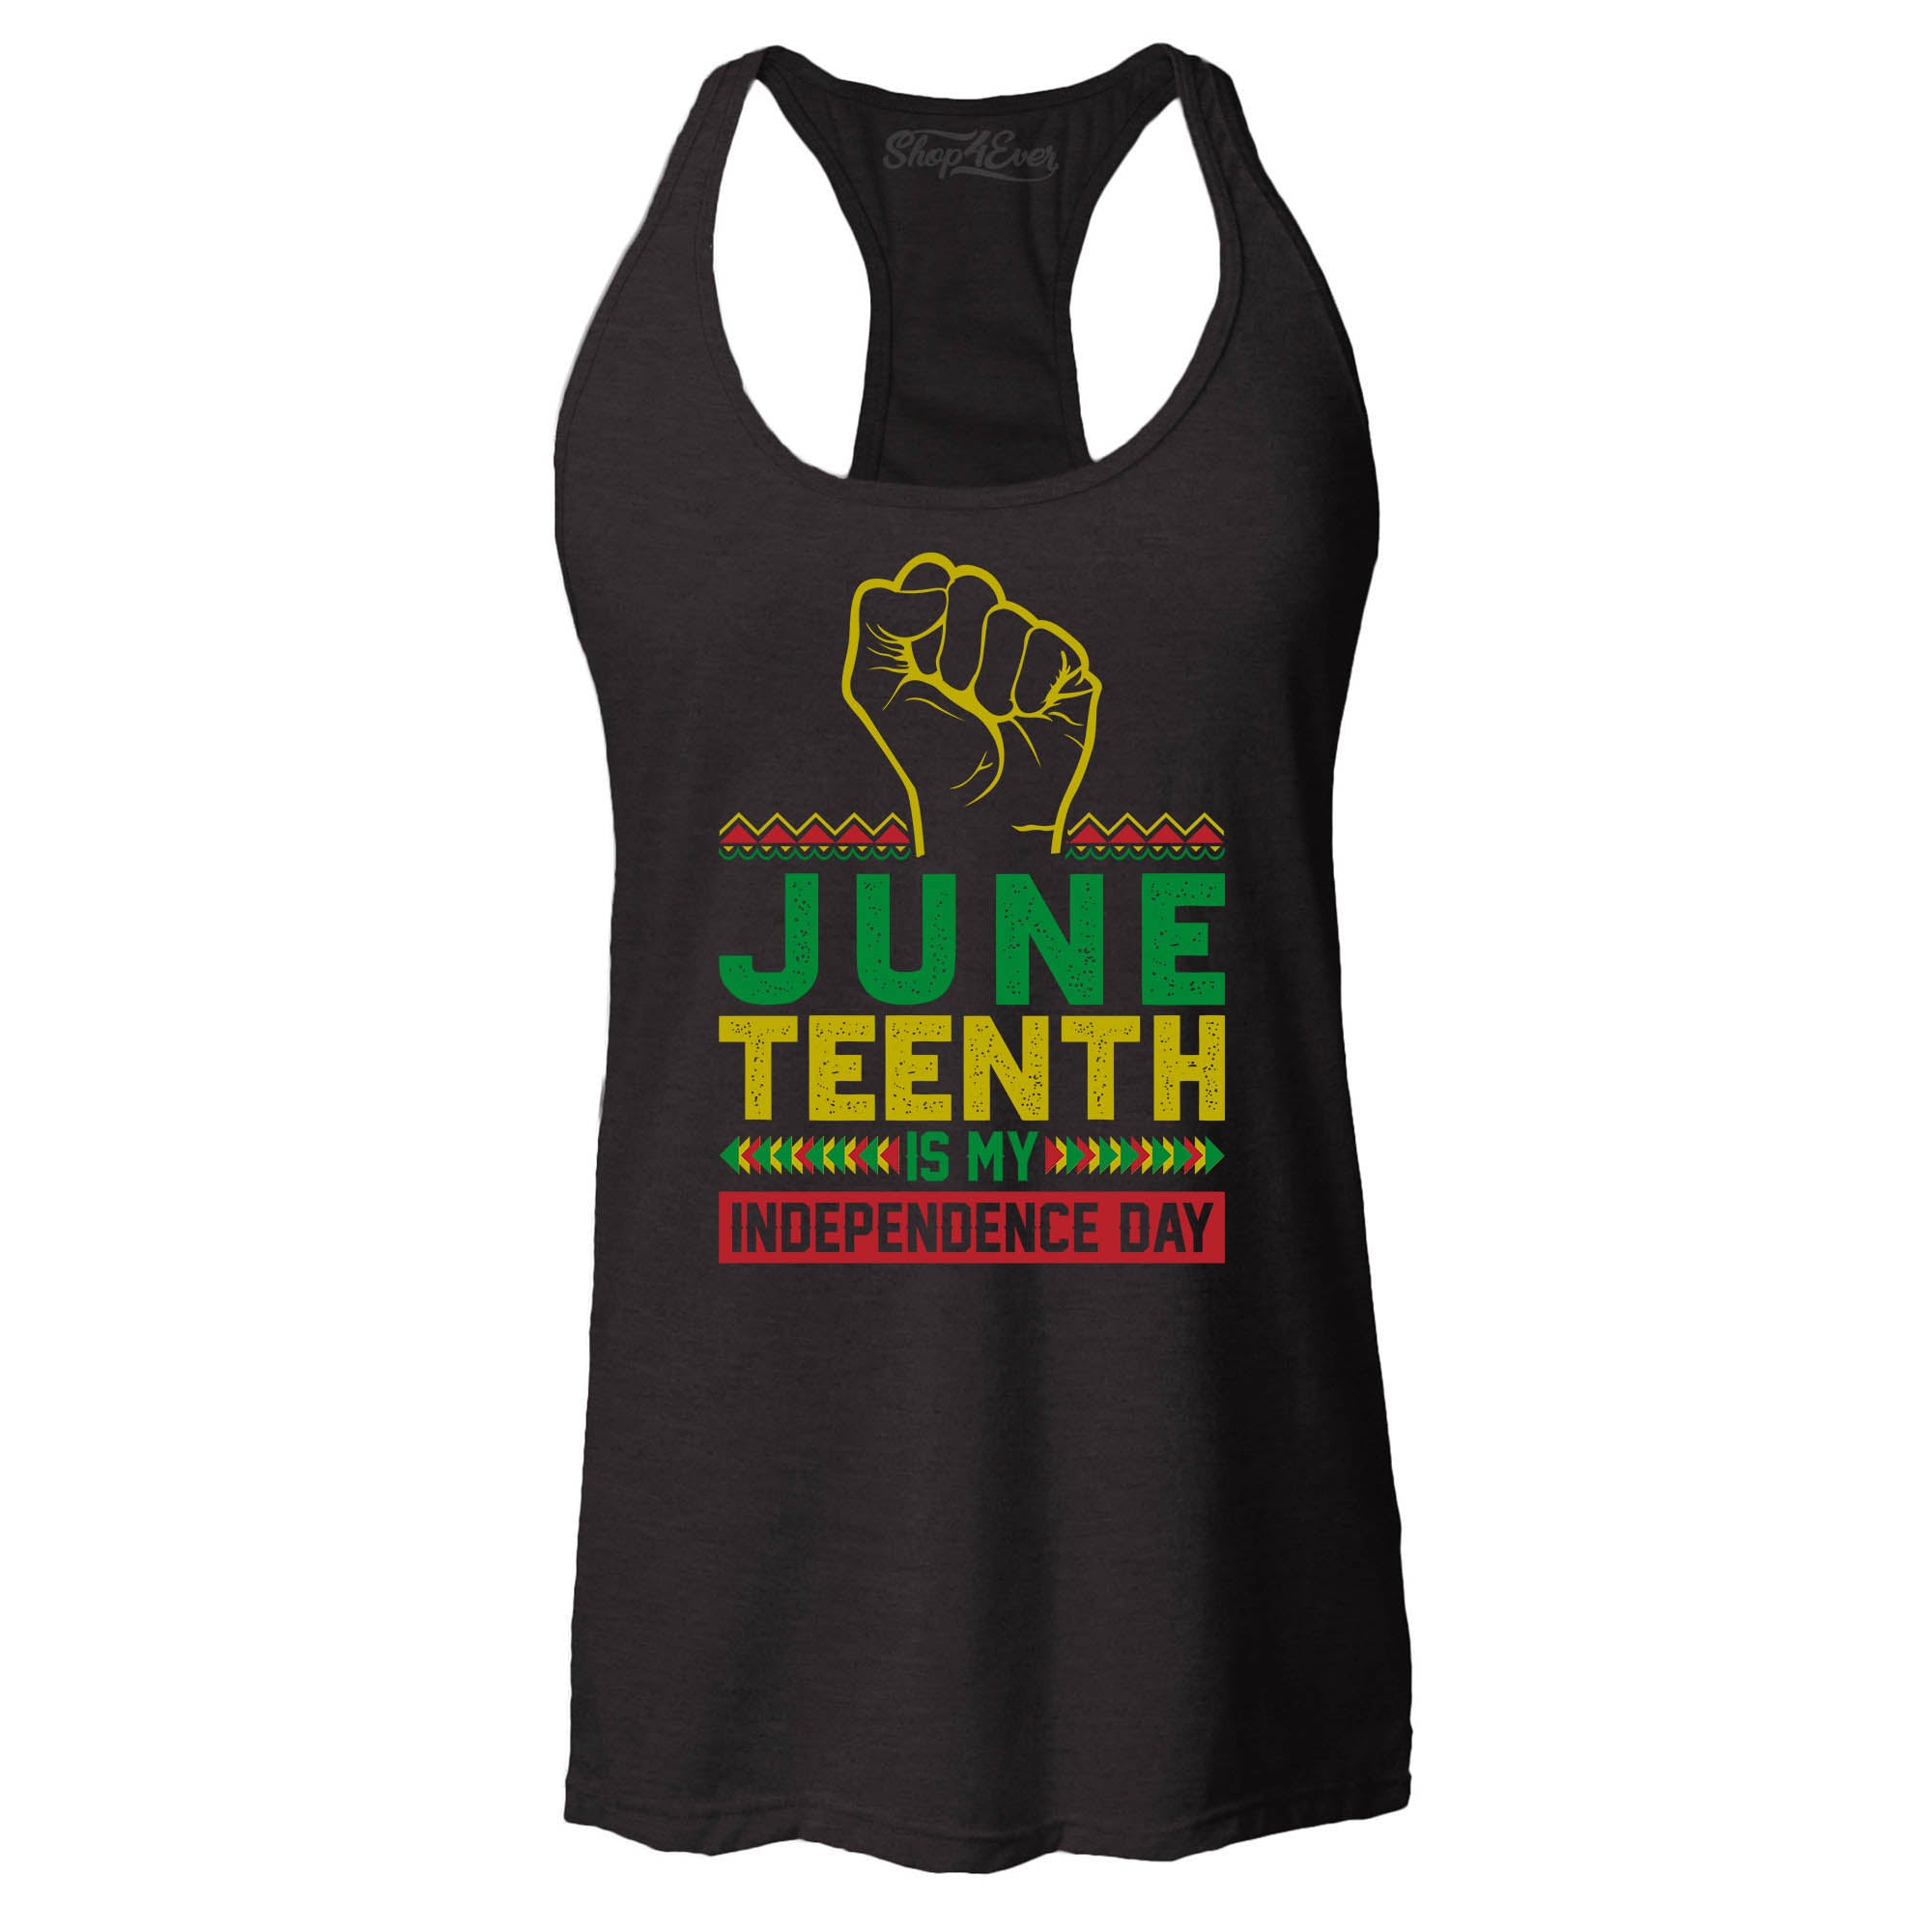 Juneteenth is My Independence Day June 19th 1865 Women's Racerback Tank Top Slim Fit